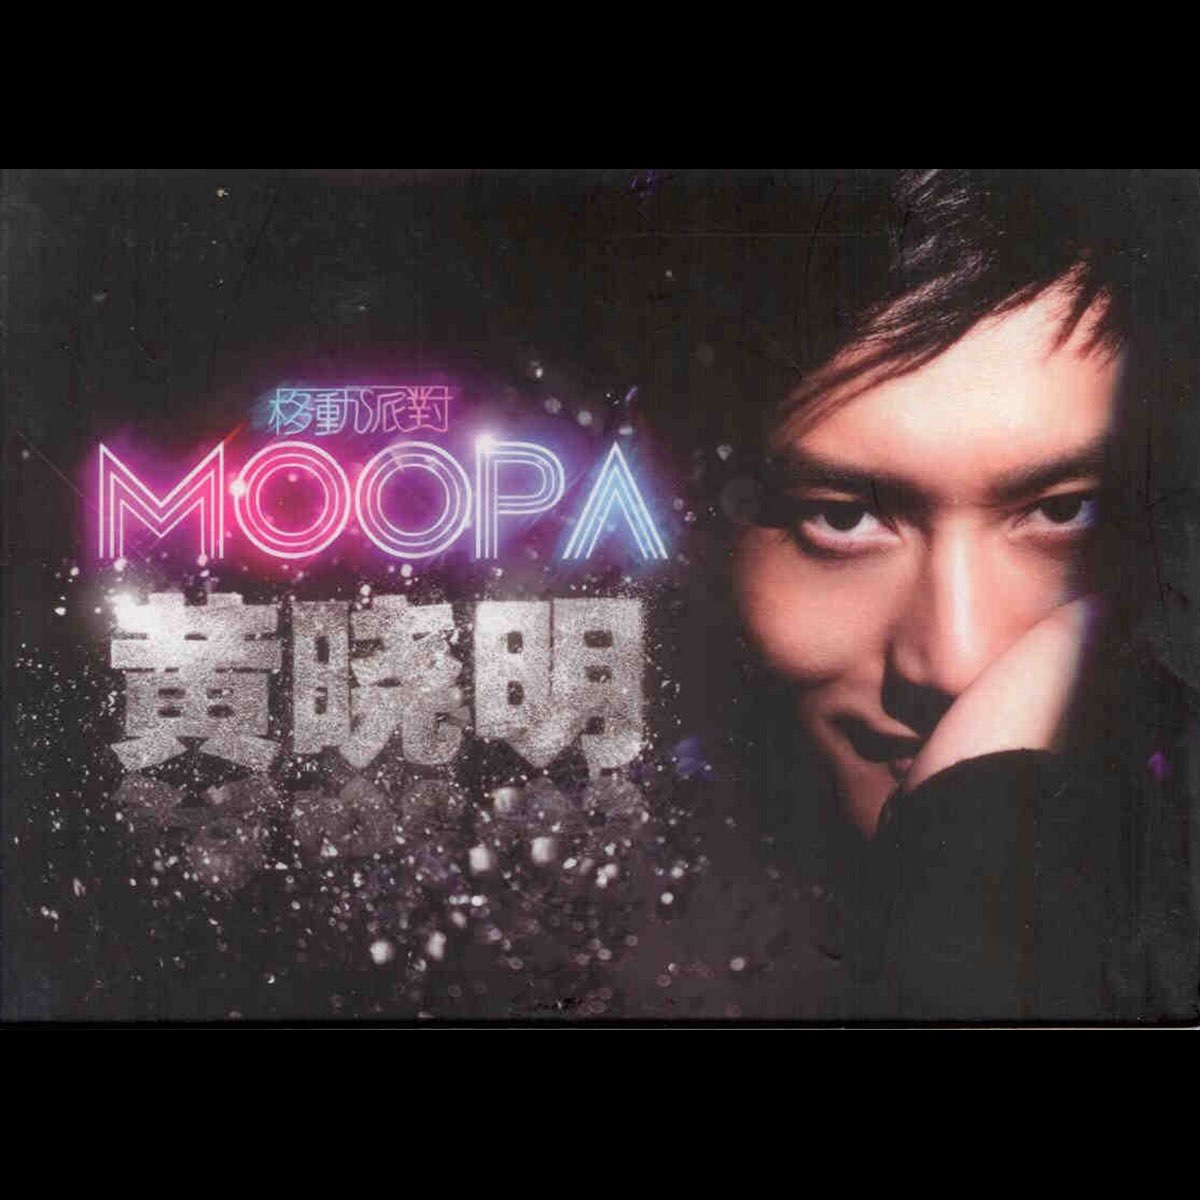 Moopa - search